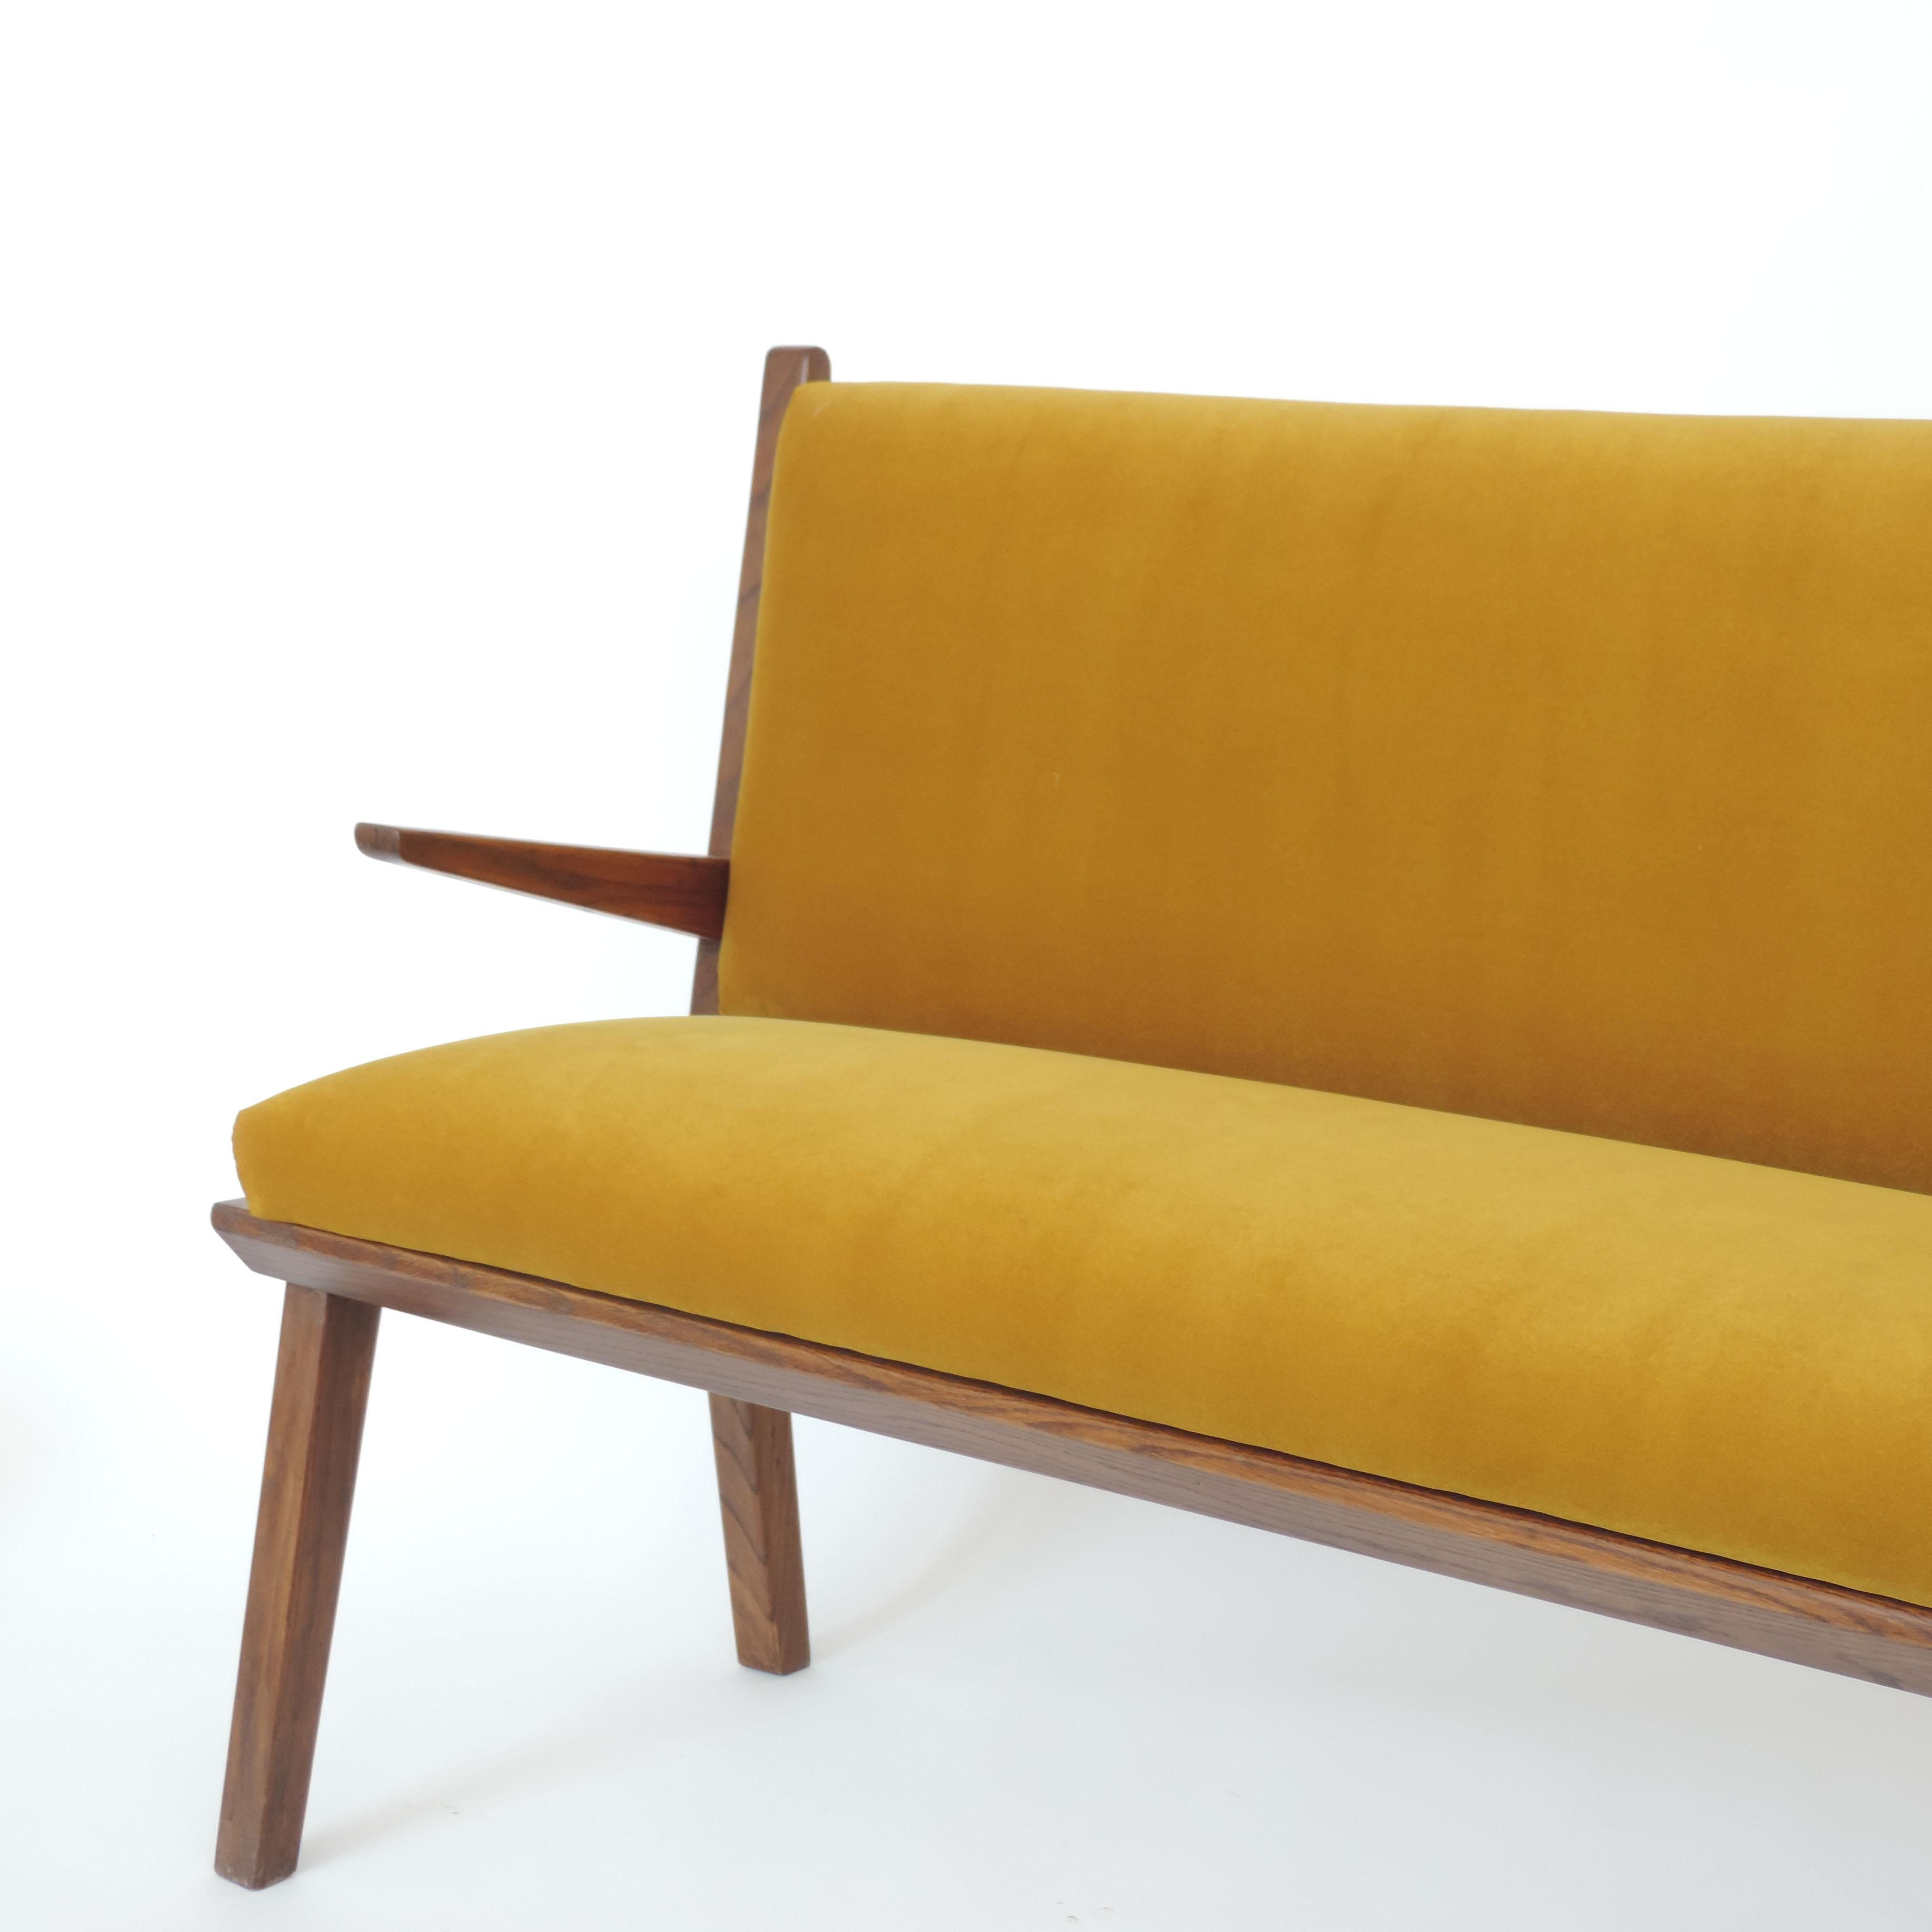 Mid-20th Century Italian 1940s Bench in Wood and Yellow Velvet Upholstery For Sale